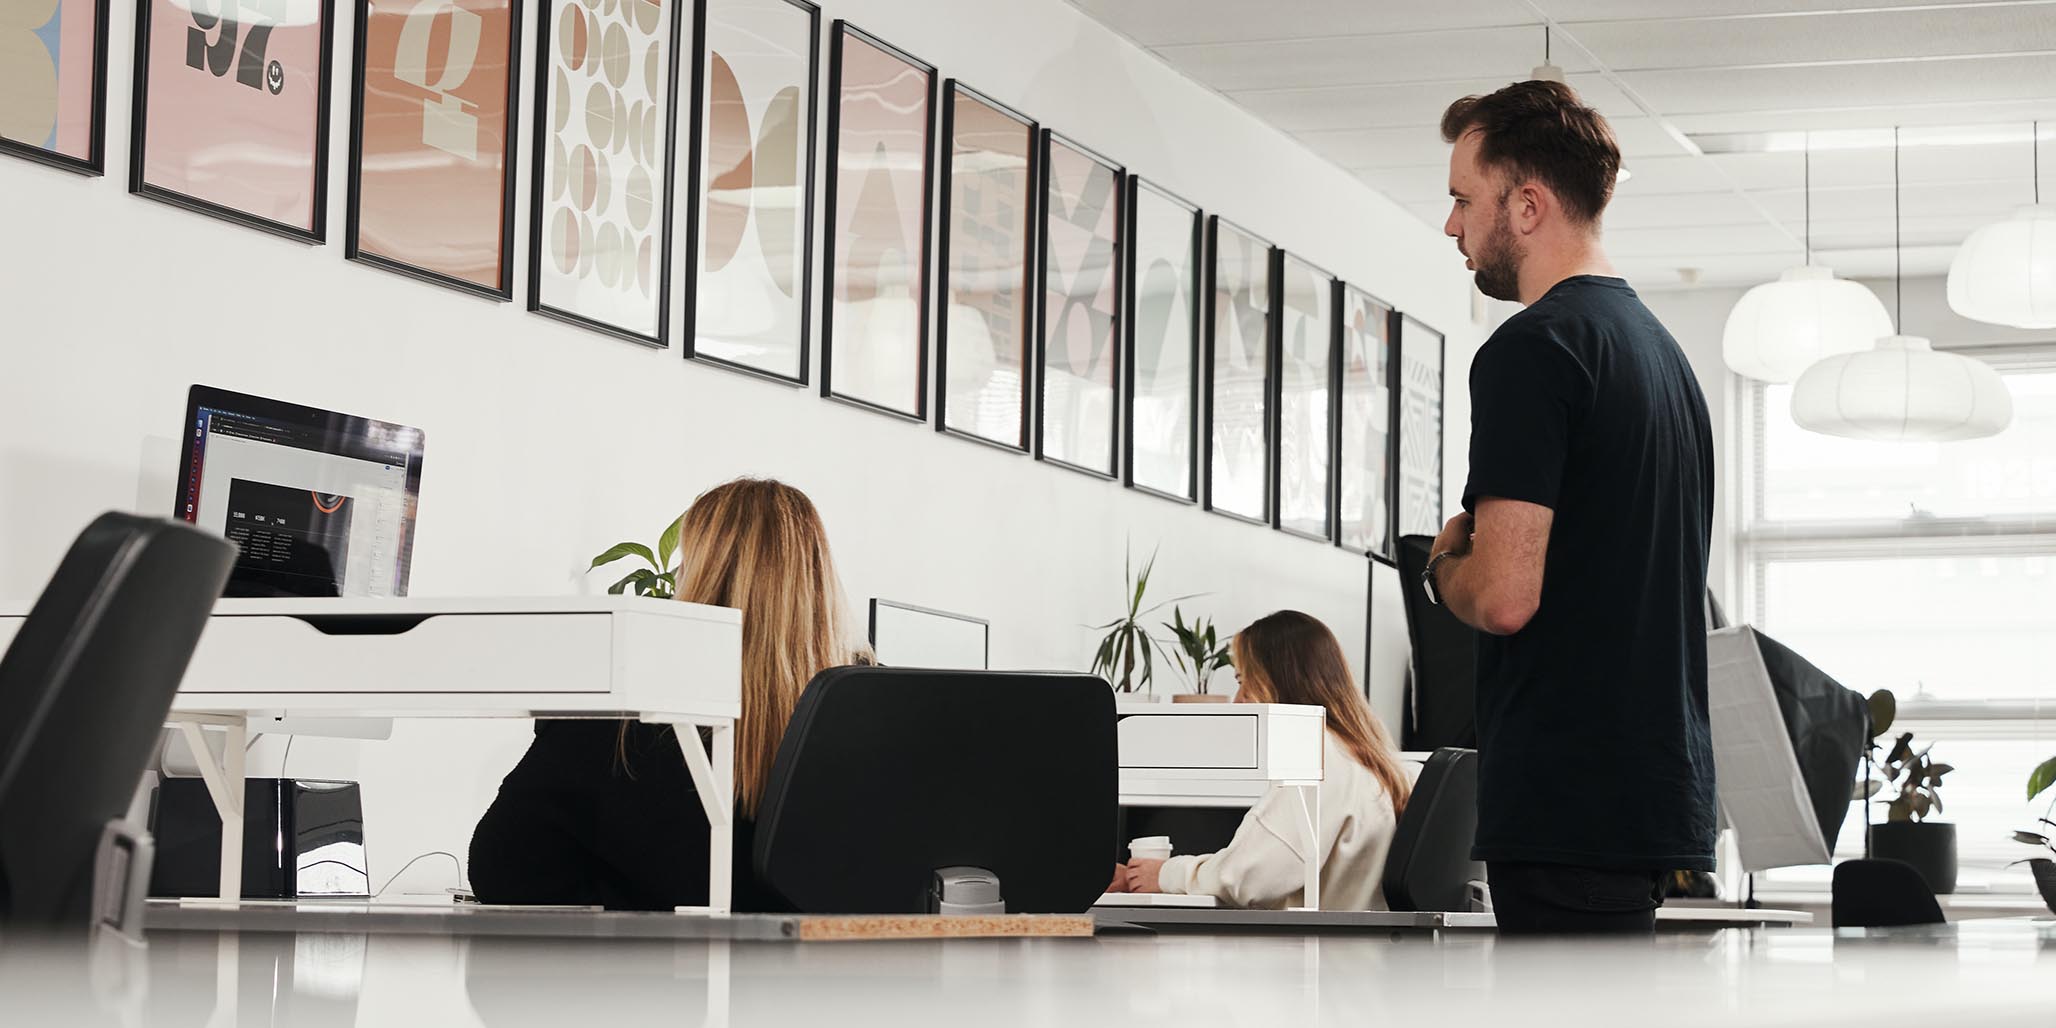 This photo shows workers inside Brand agencies Sydney, such as Percept. It depicts branding strategy & brand identity design being carried out by the creative Brand Designers at Percept, the Brand Agency Sydney.